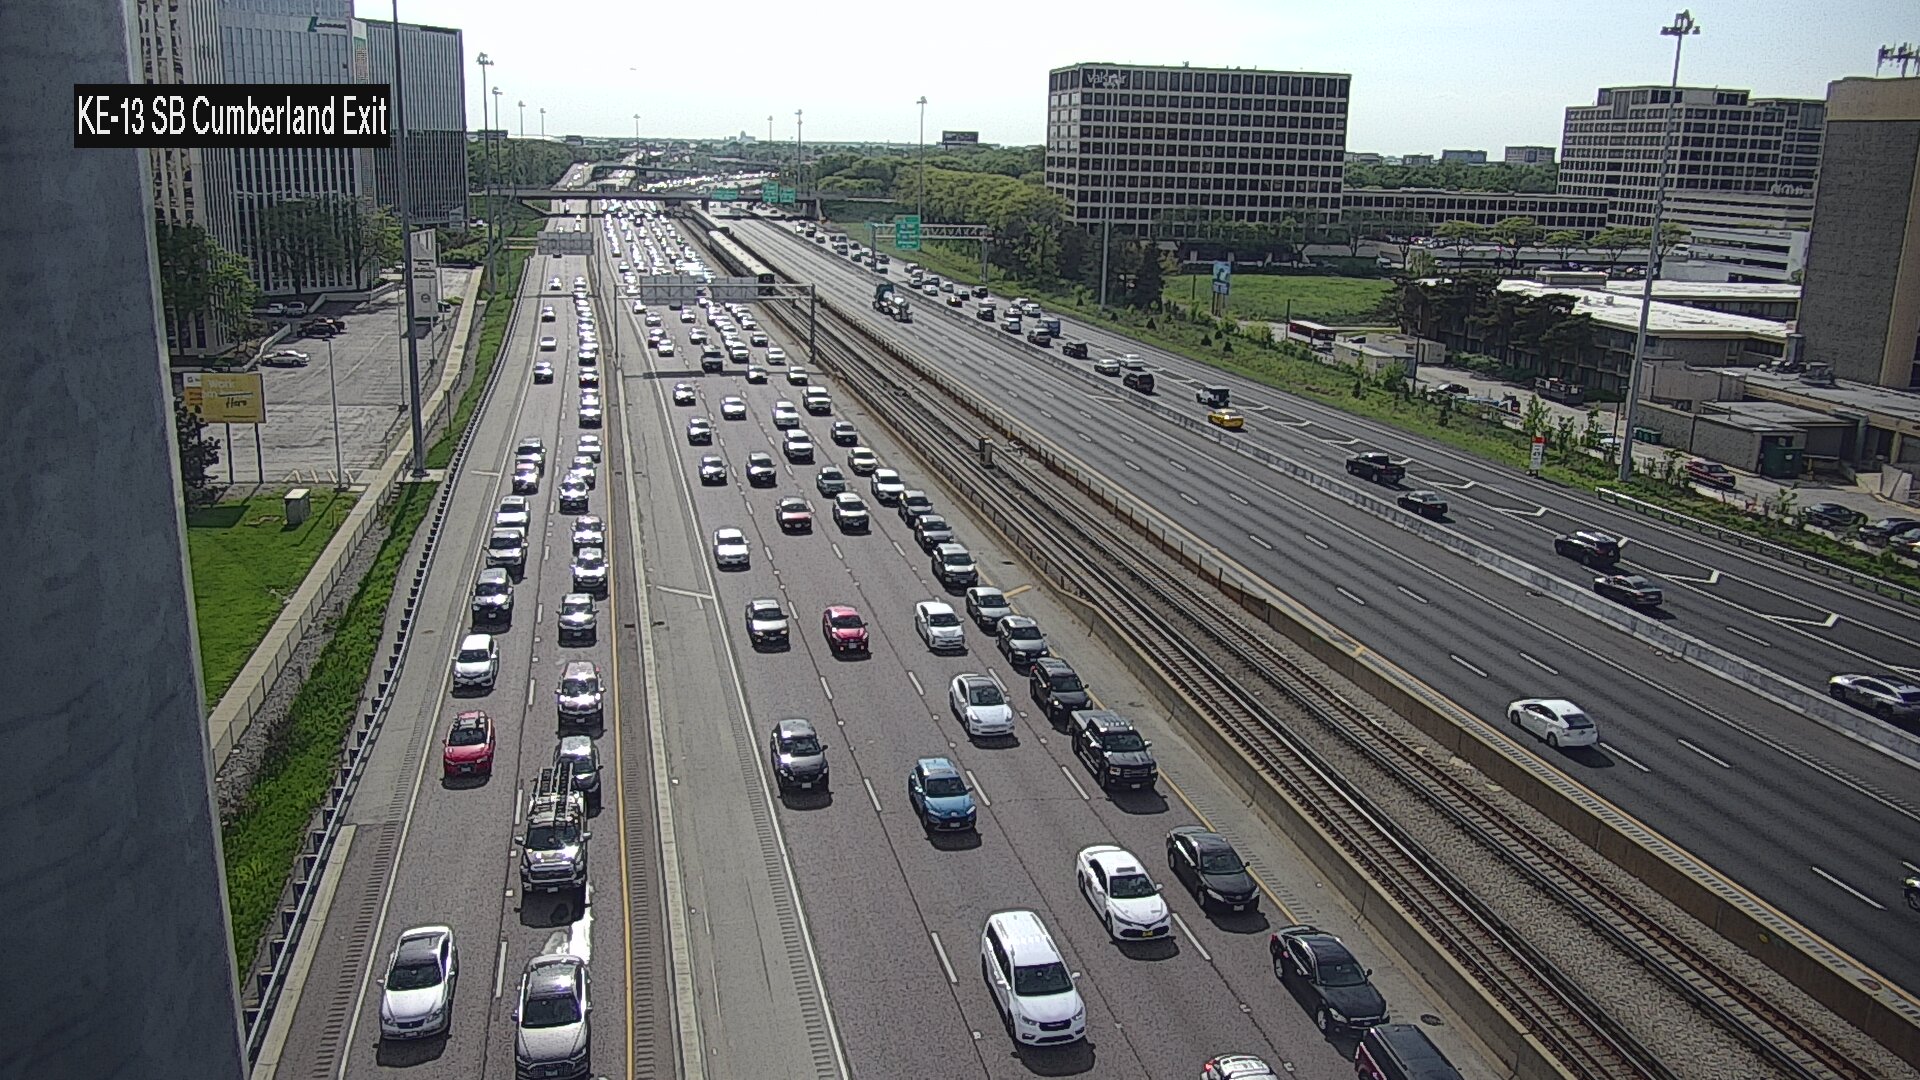 Kennedy Expressway at Cumberland 1 - Chicago and Illinois